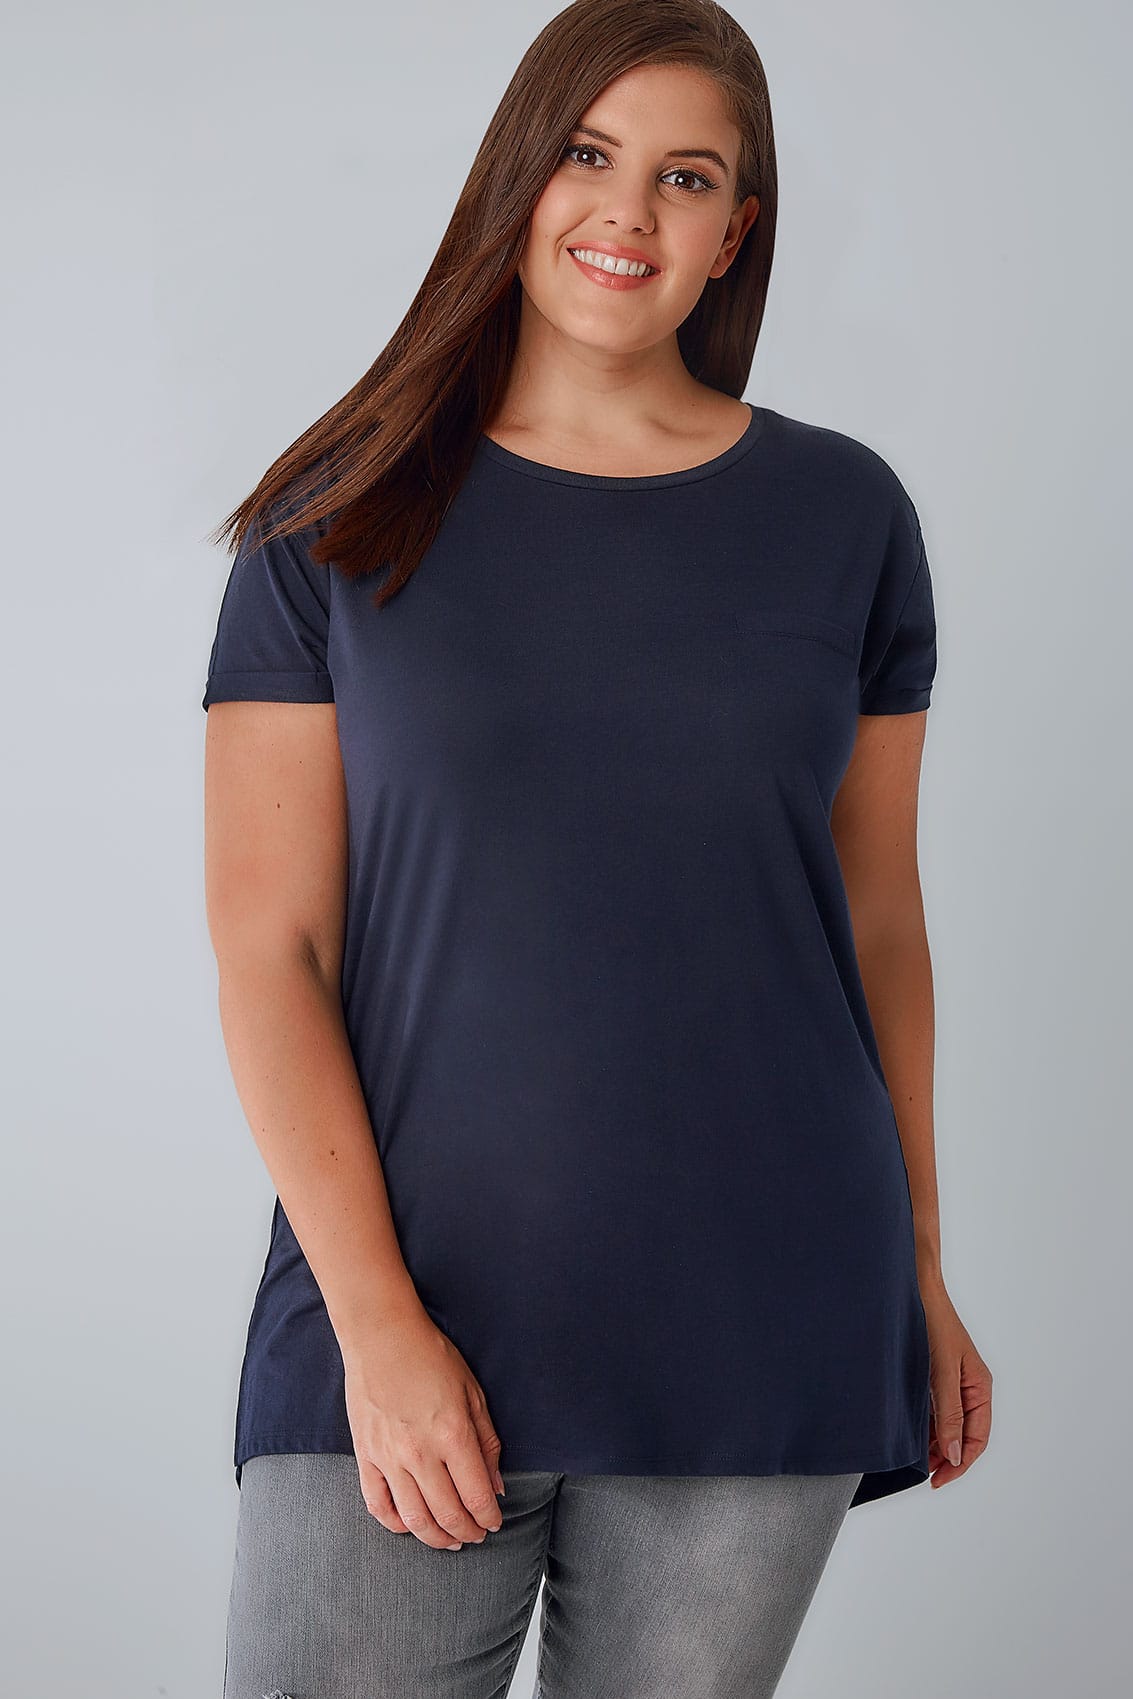 Lilac Pocket T-Shirt With Curved Hem, Plus size 16 to 36